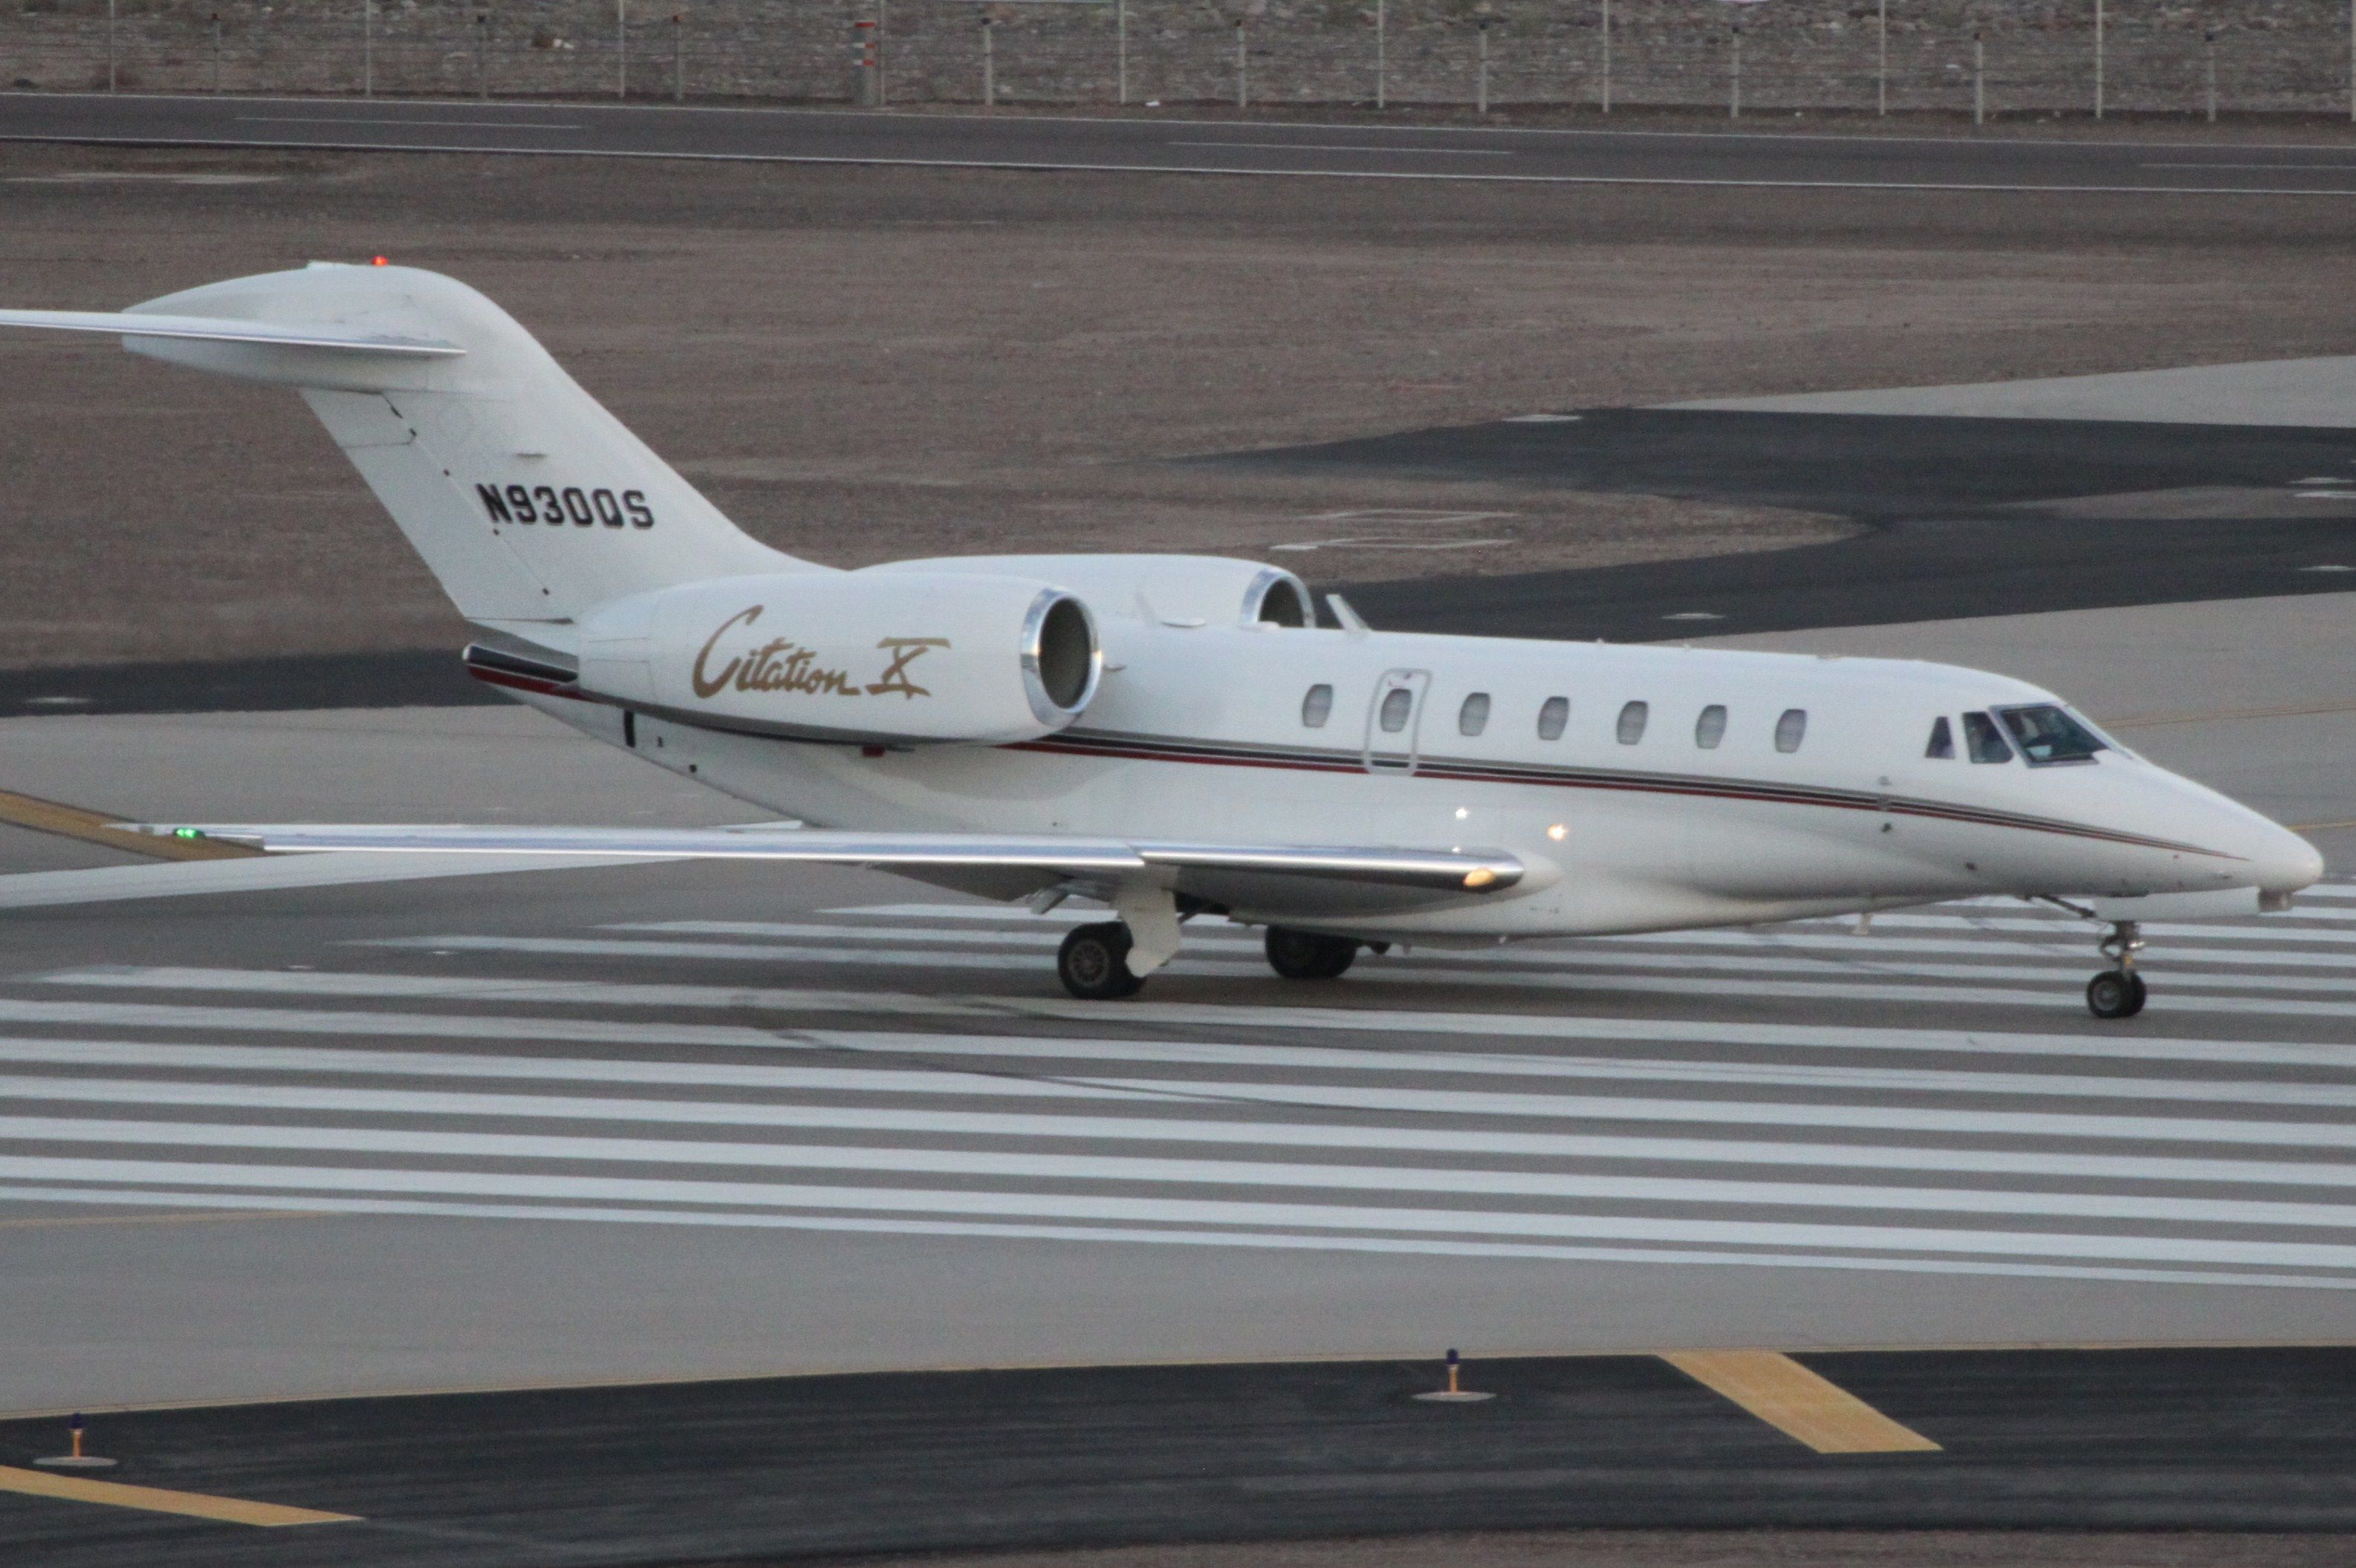 A Cessna Citation X lined up on the runway.